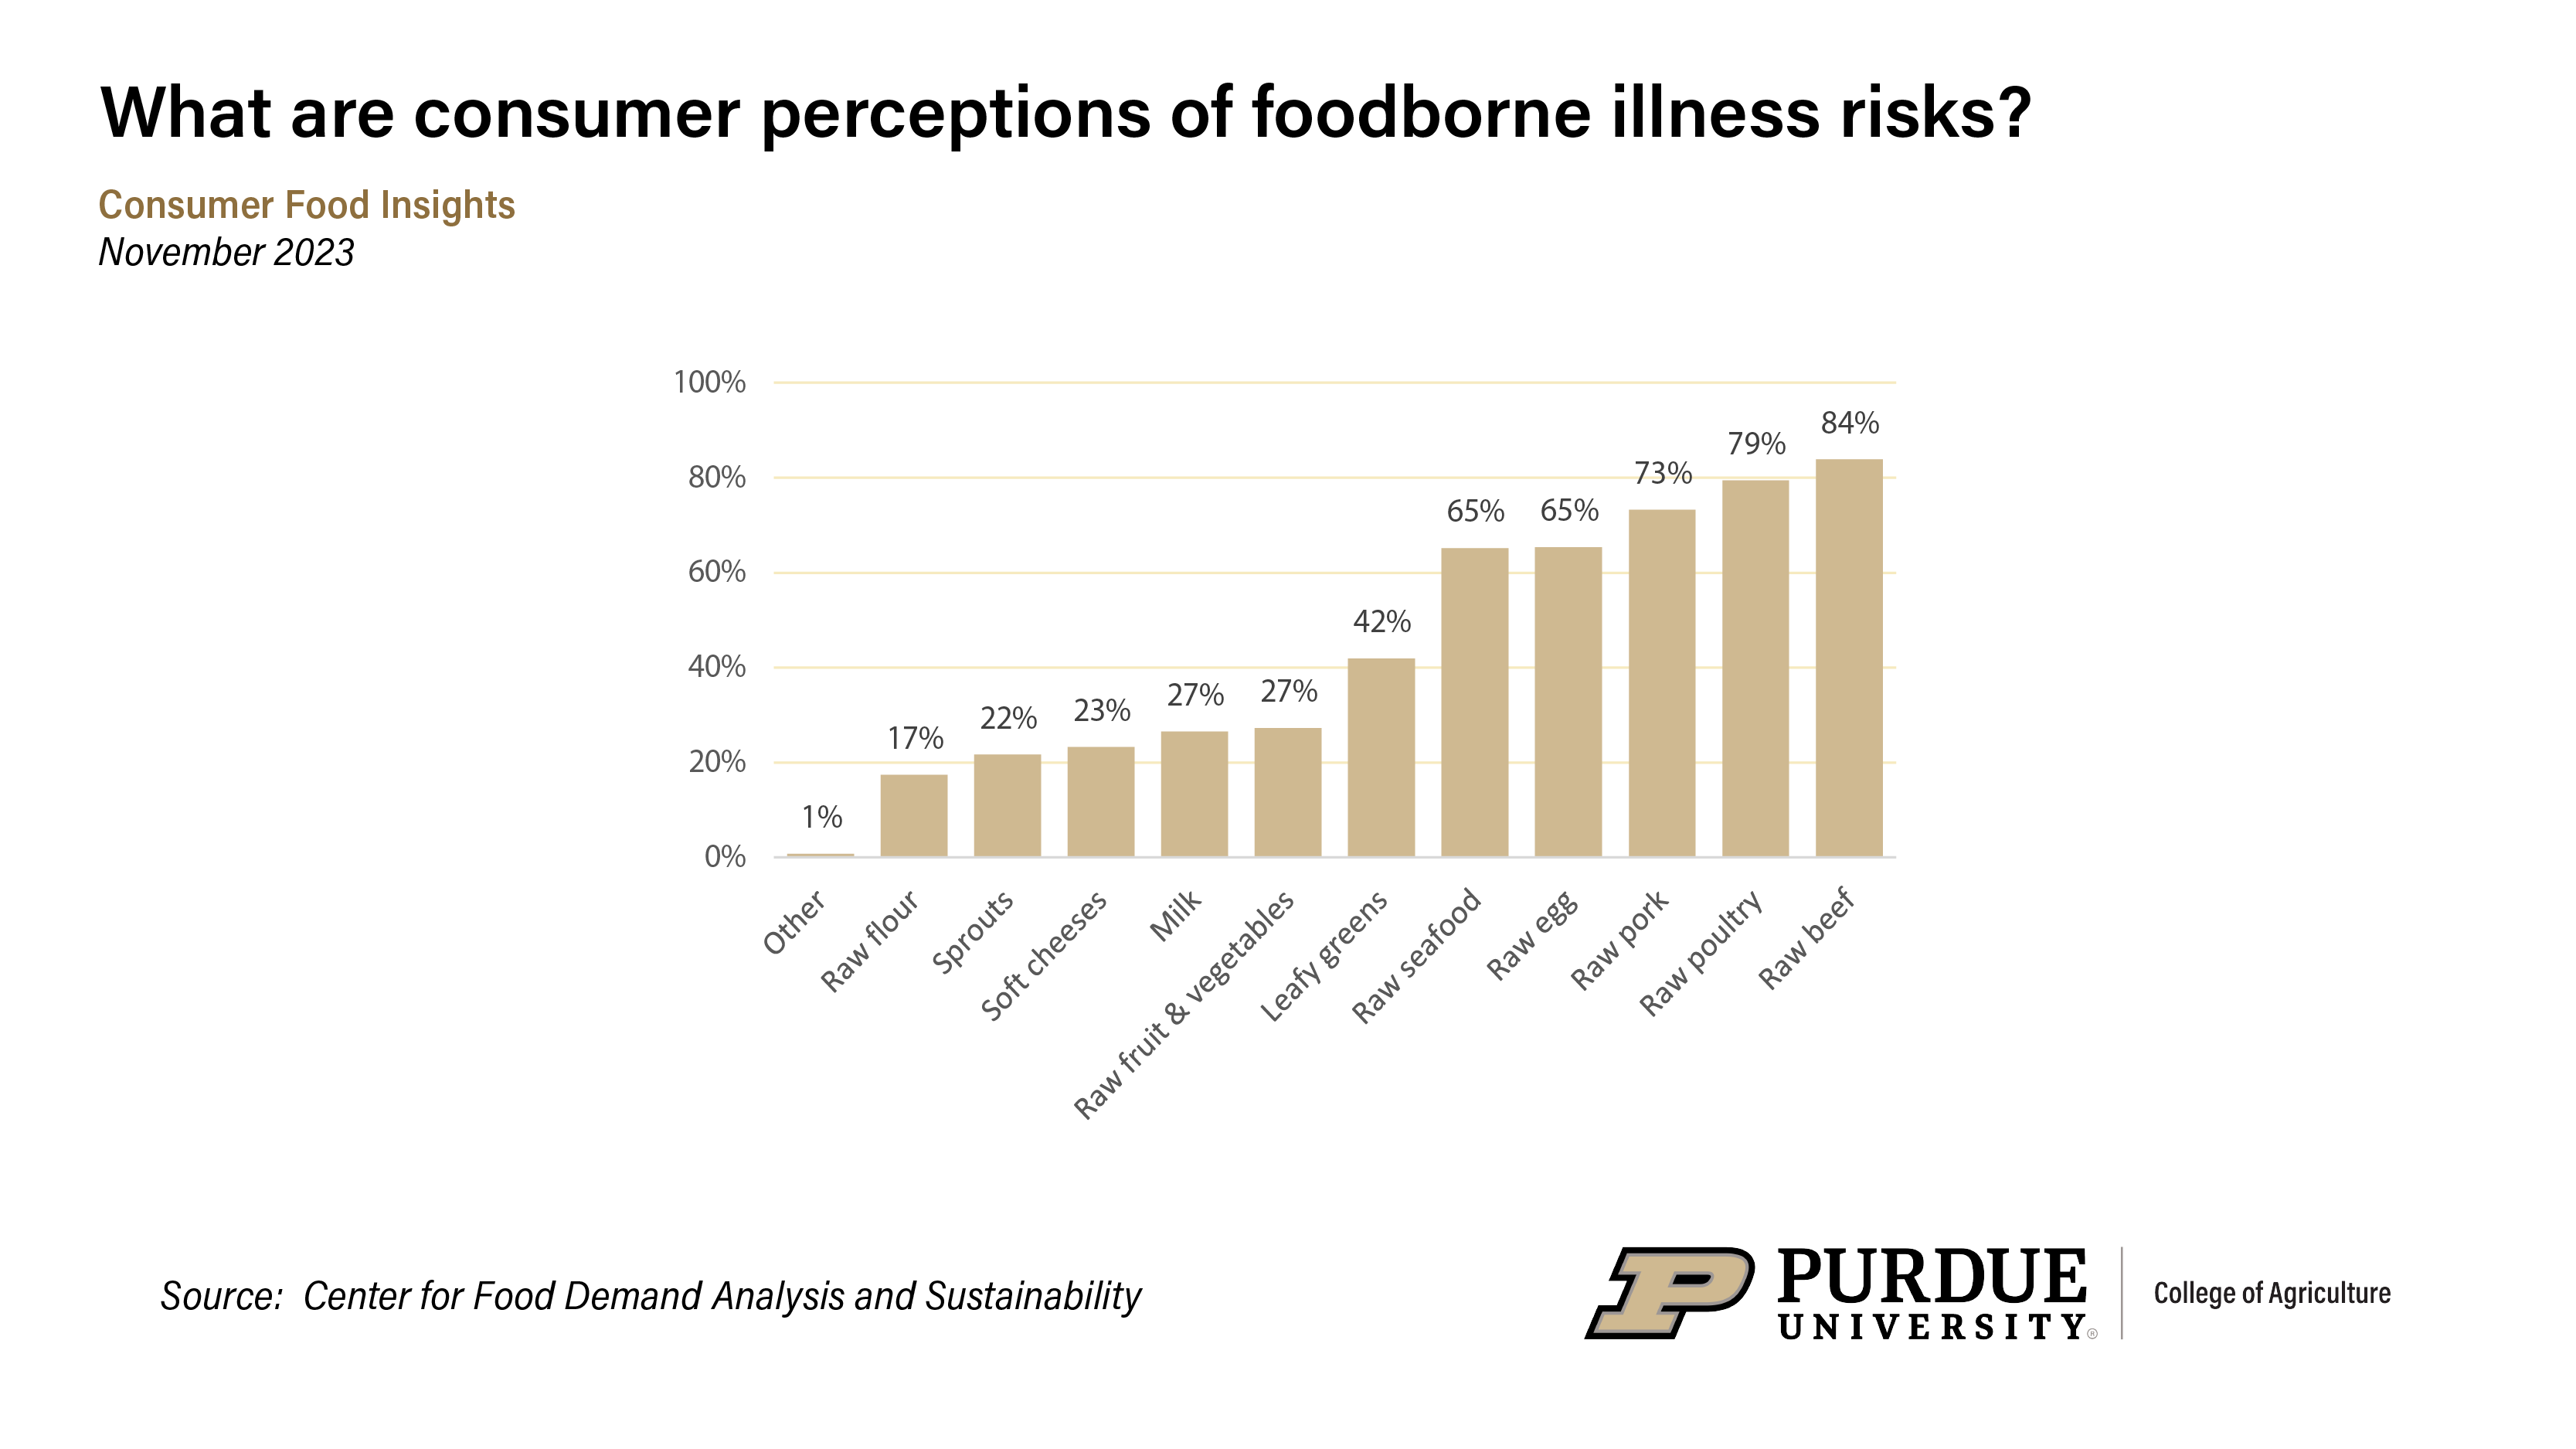 Food Items Perceived as Having a High-risk of Containing Foodborne Bacteria (% of responses where selection occurred), Nov. 2023